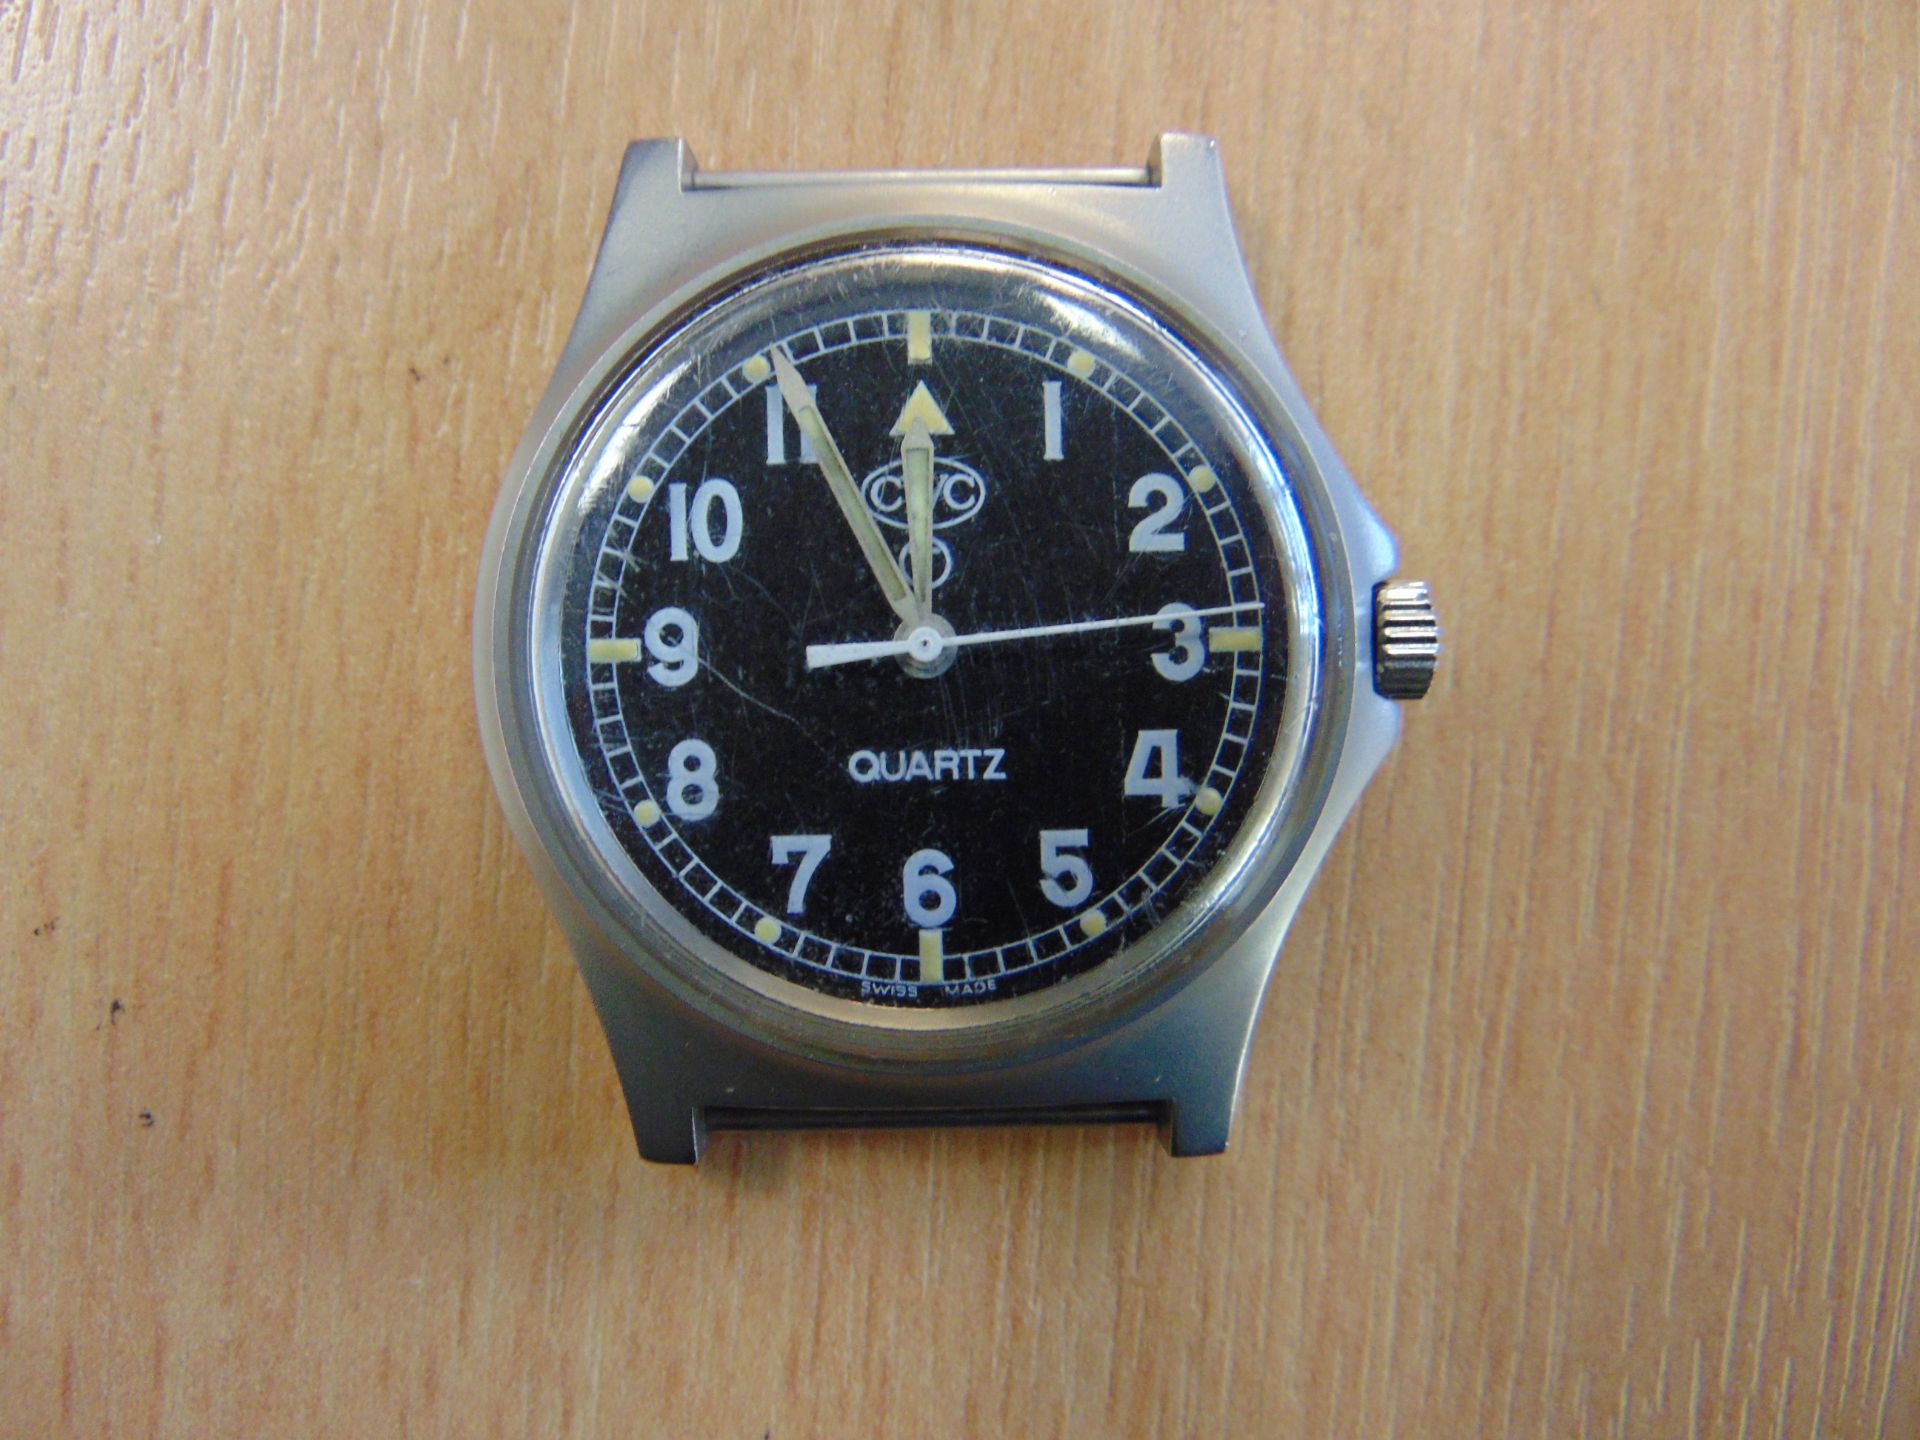 VERY NICE CWC W10 SERVICE WATCH WATER PROOF TO 5 ATM NATO MARKED DATED 2006 - Image 4 of 12